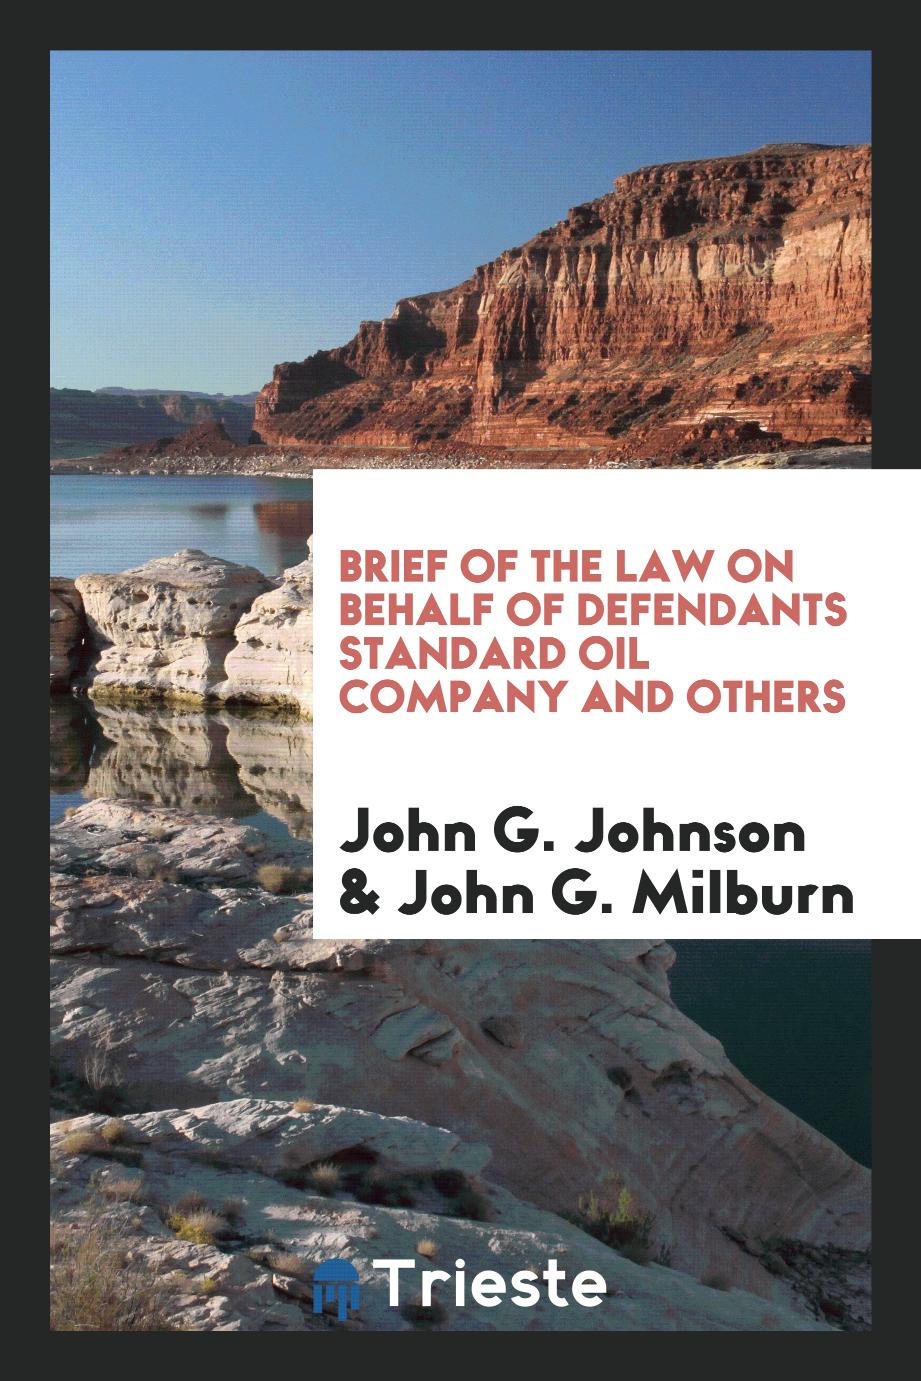 Brief of the Law on Behalf of Defendants Standard Oil Company and others